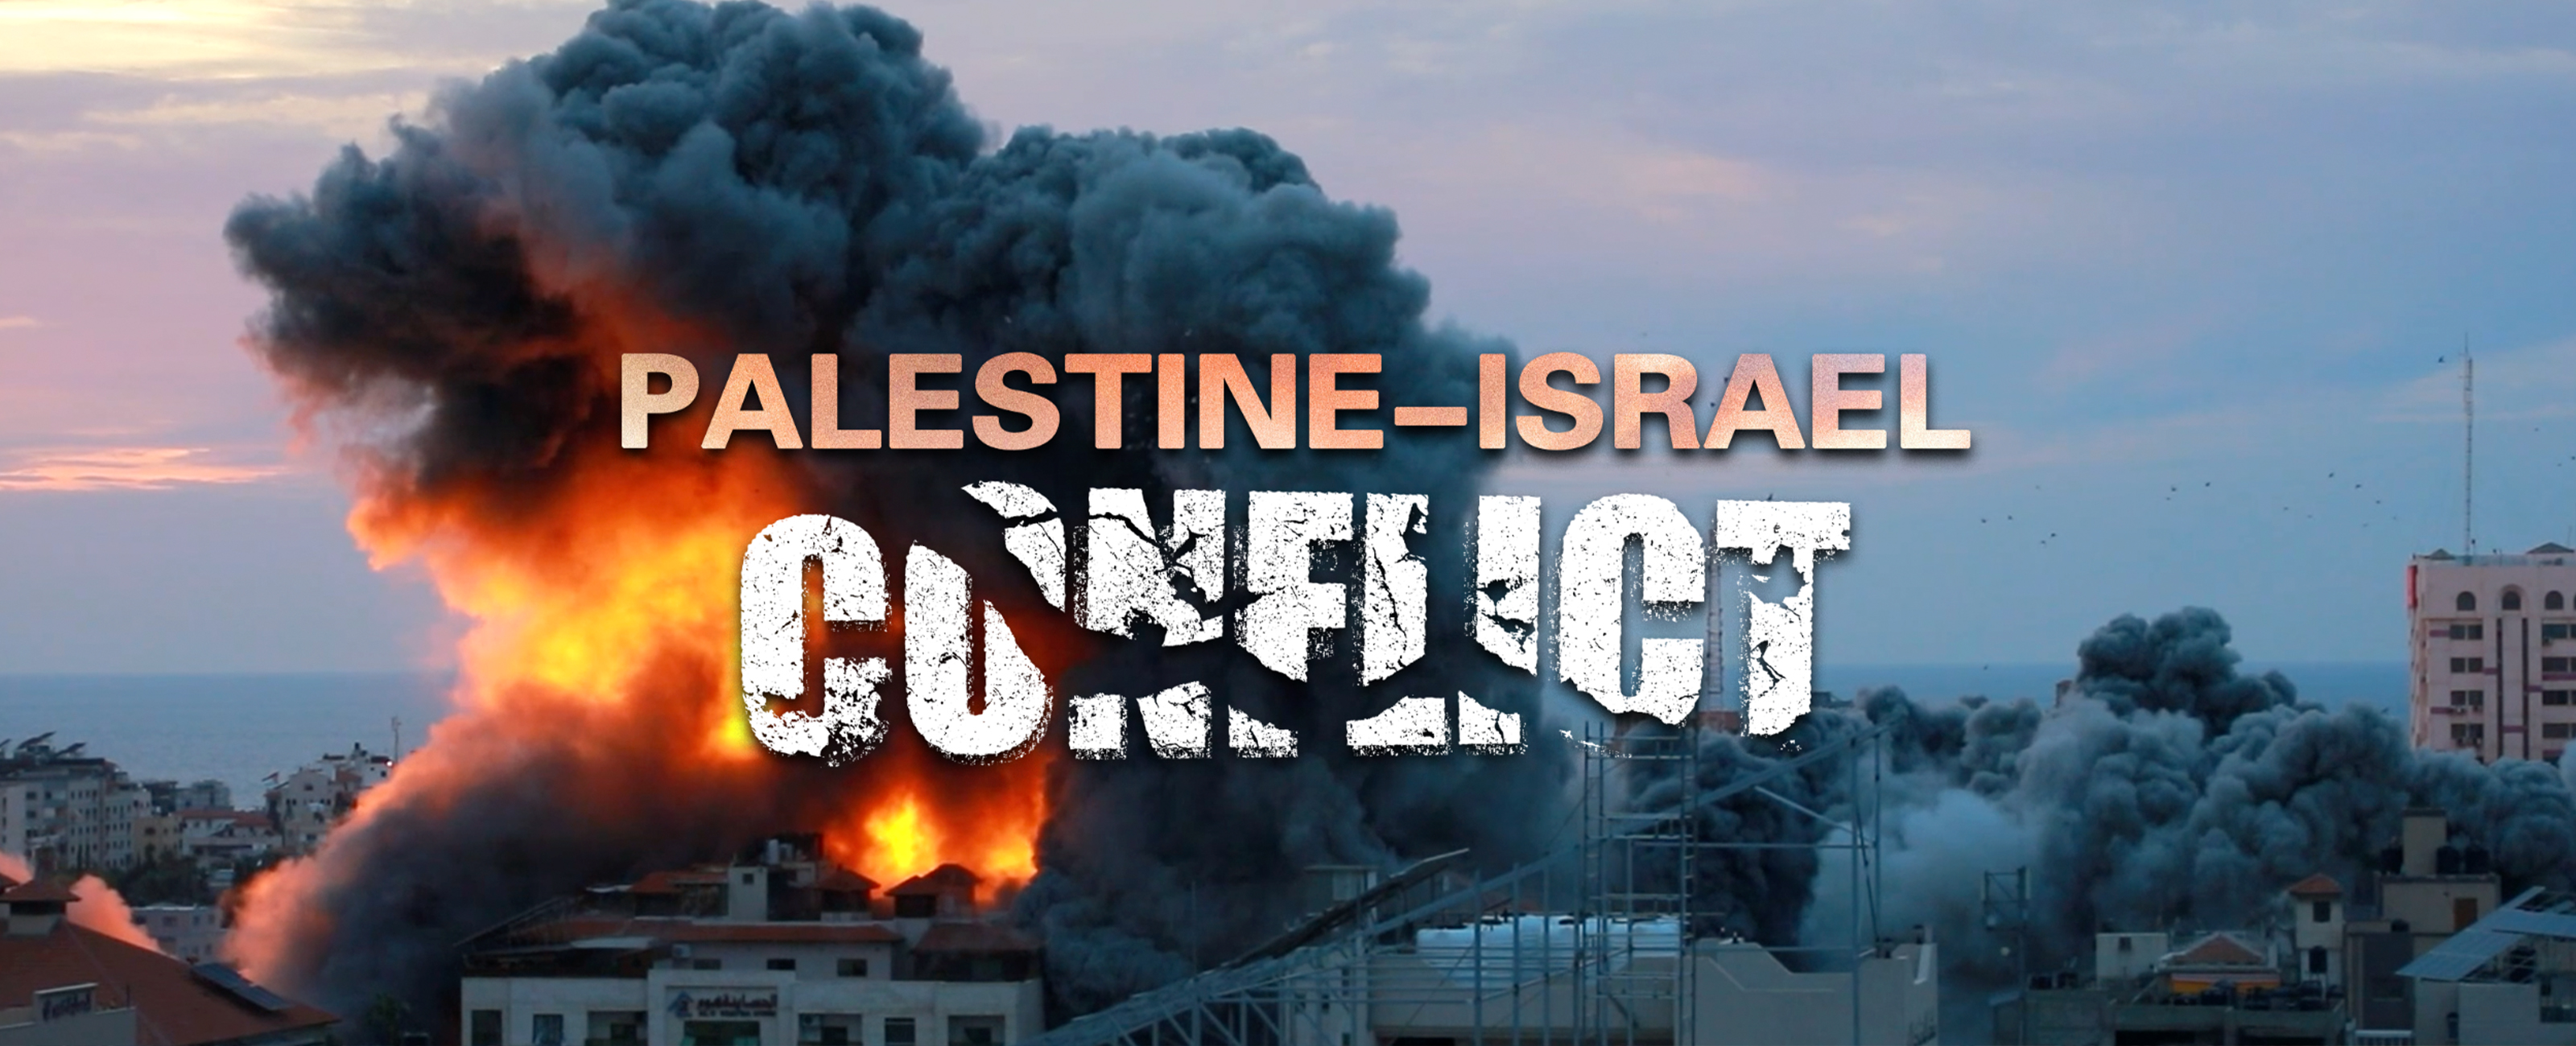 web banner for Palestine-Israel conflict special page